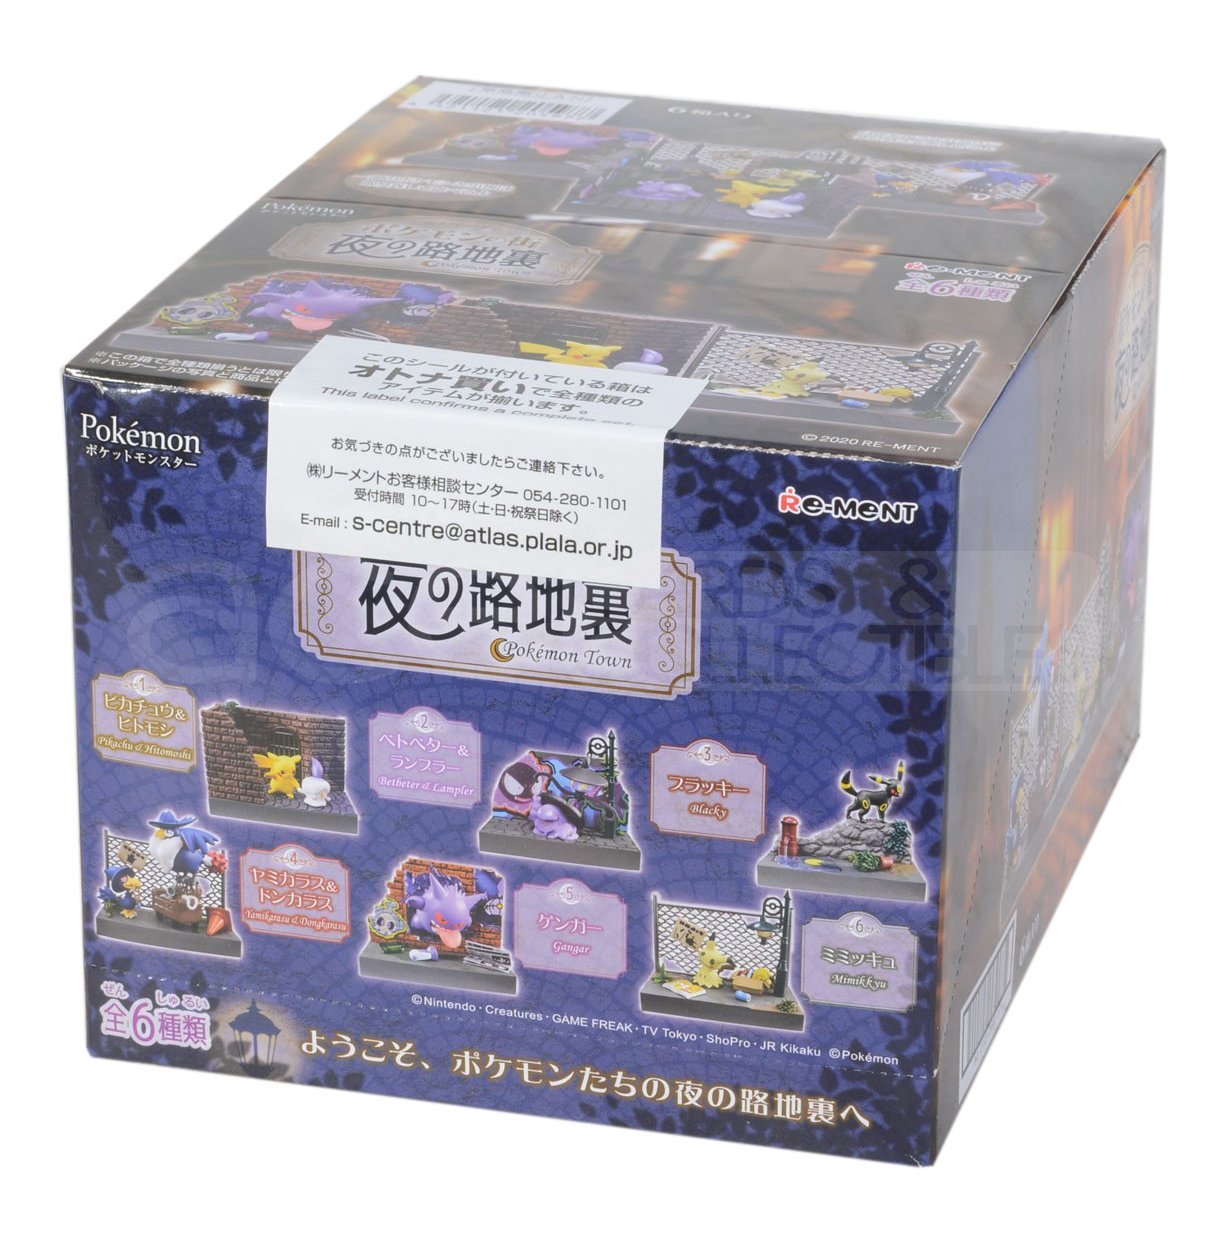 Re-Ment Pokemon Town -Back Alley at Night- Ace Cards  Collectibles